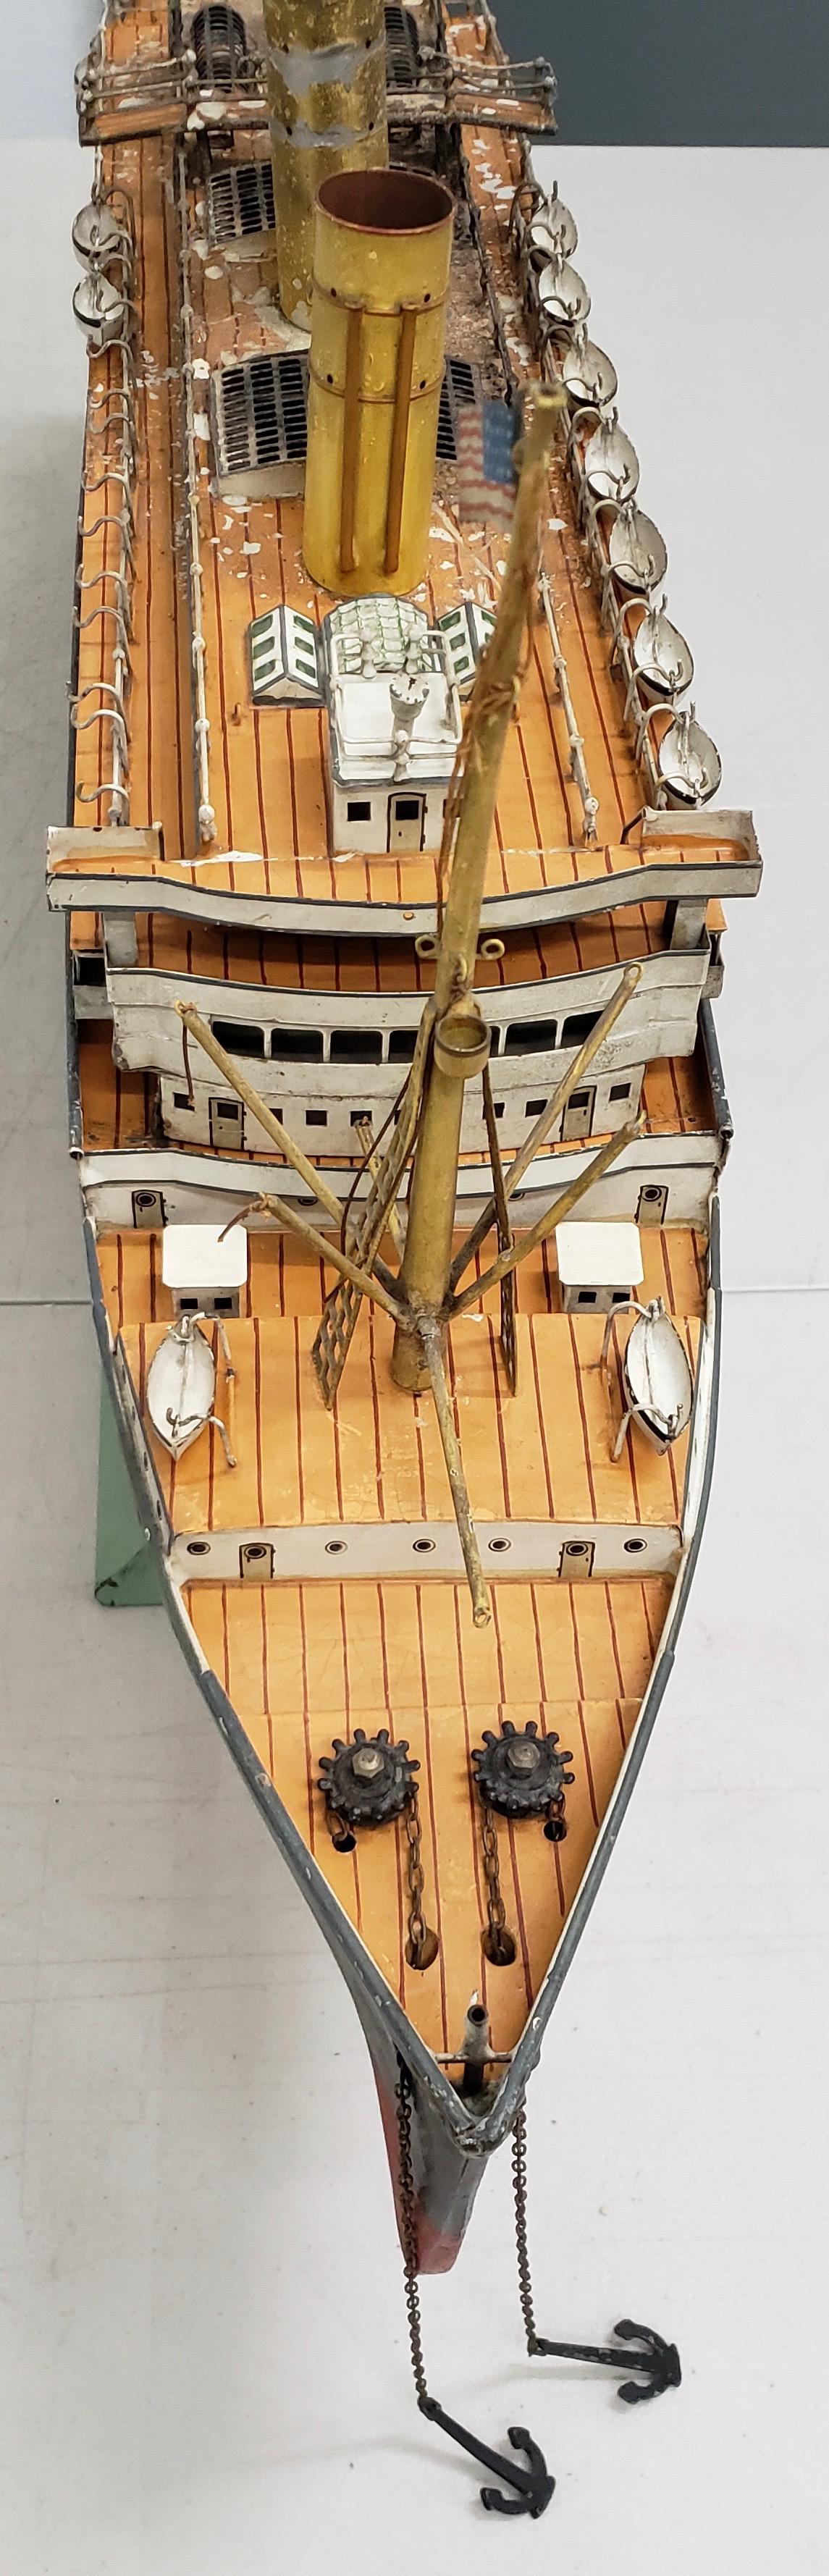 Hand-Crafted Antique Marklin Ocean Liner with American Flags and Lifeboats, circa 1900 For Sale